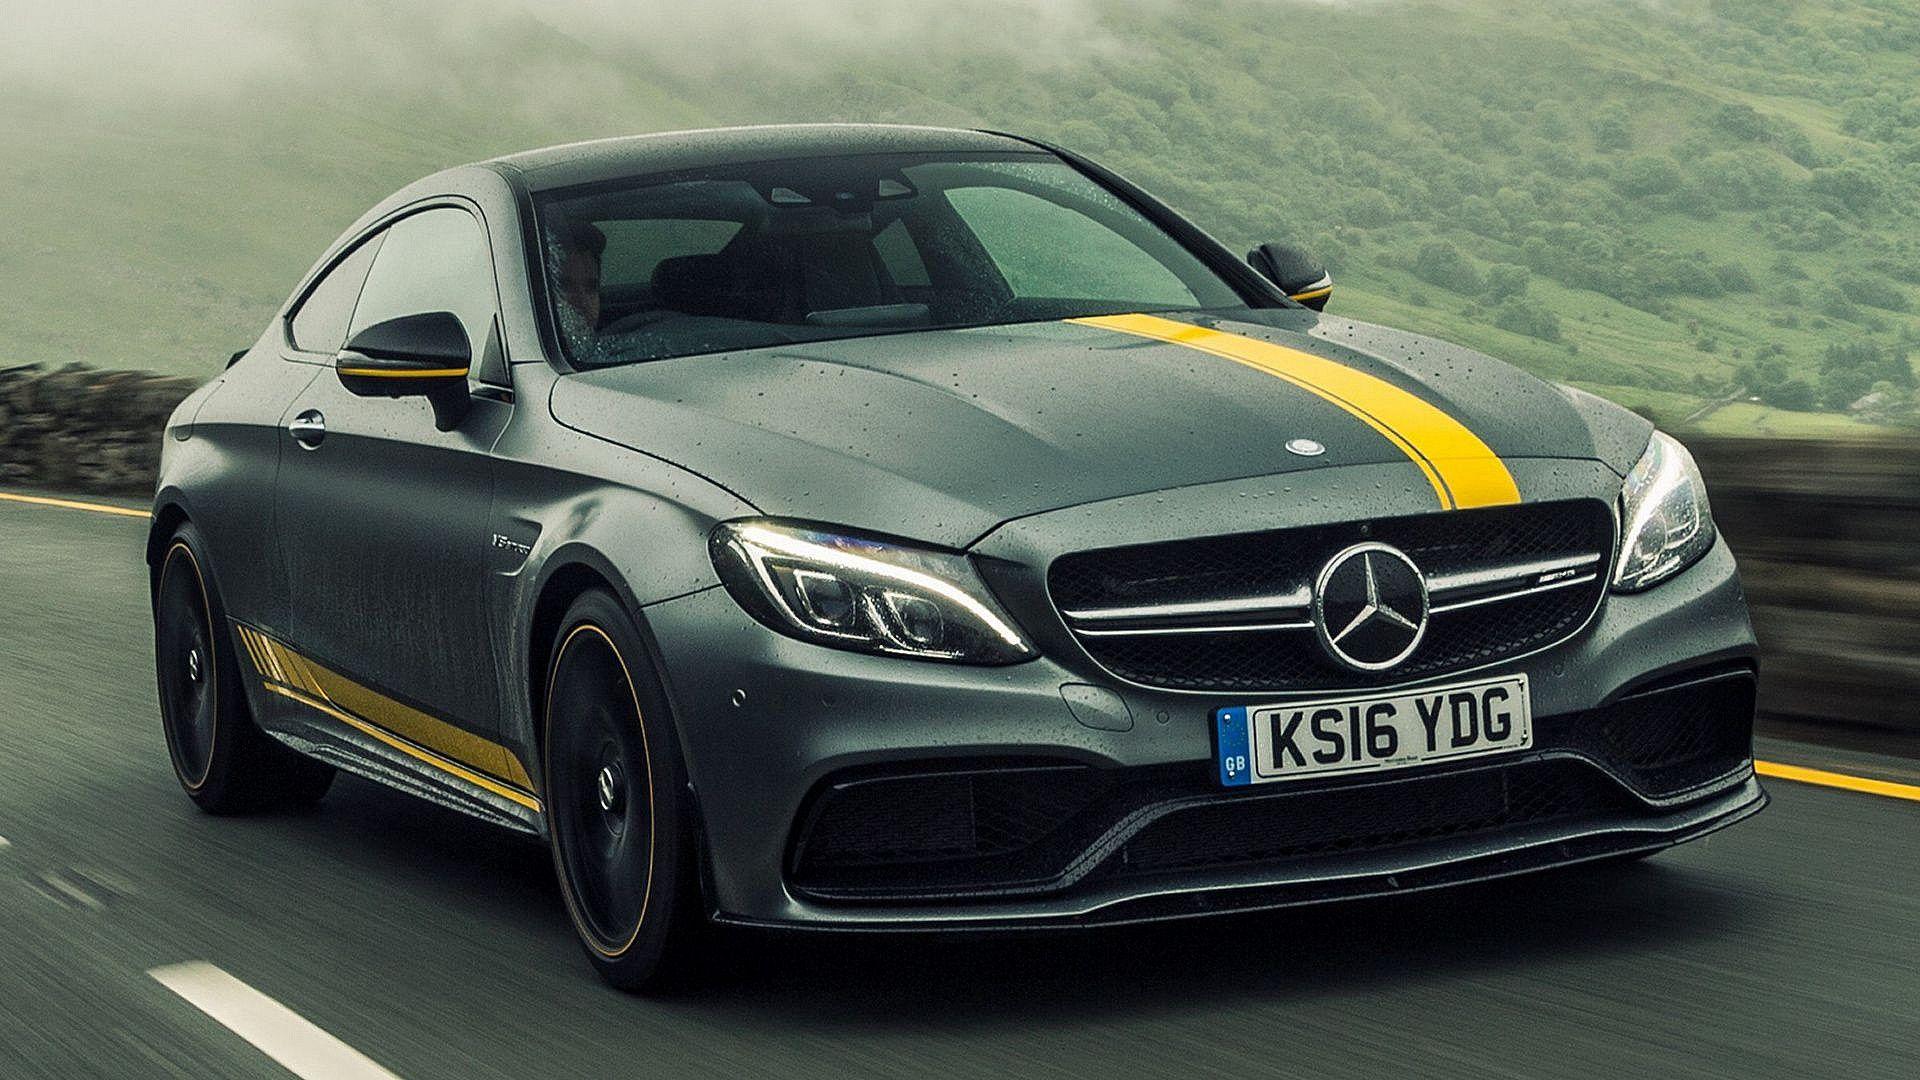 Mercedes Amg C 63 S Coupe Edition 1 2016 Uk Wallpaper And HD Image